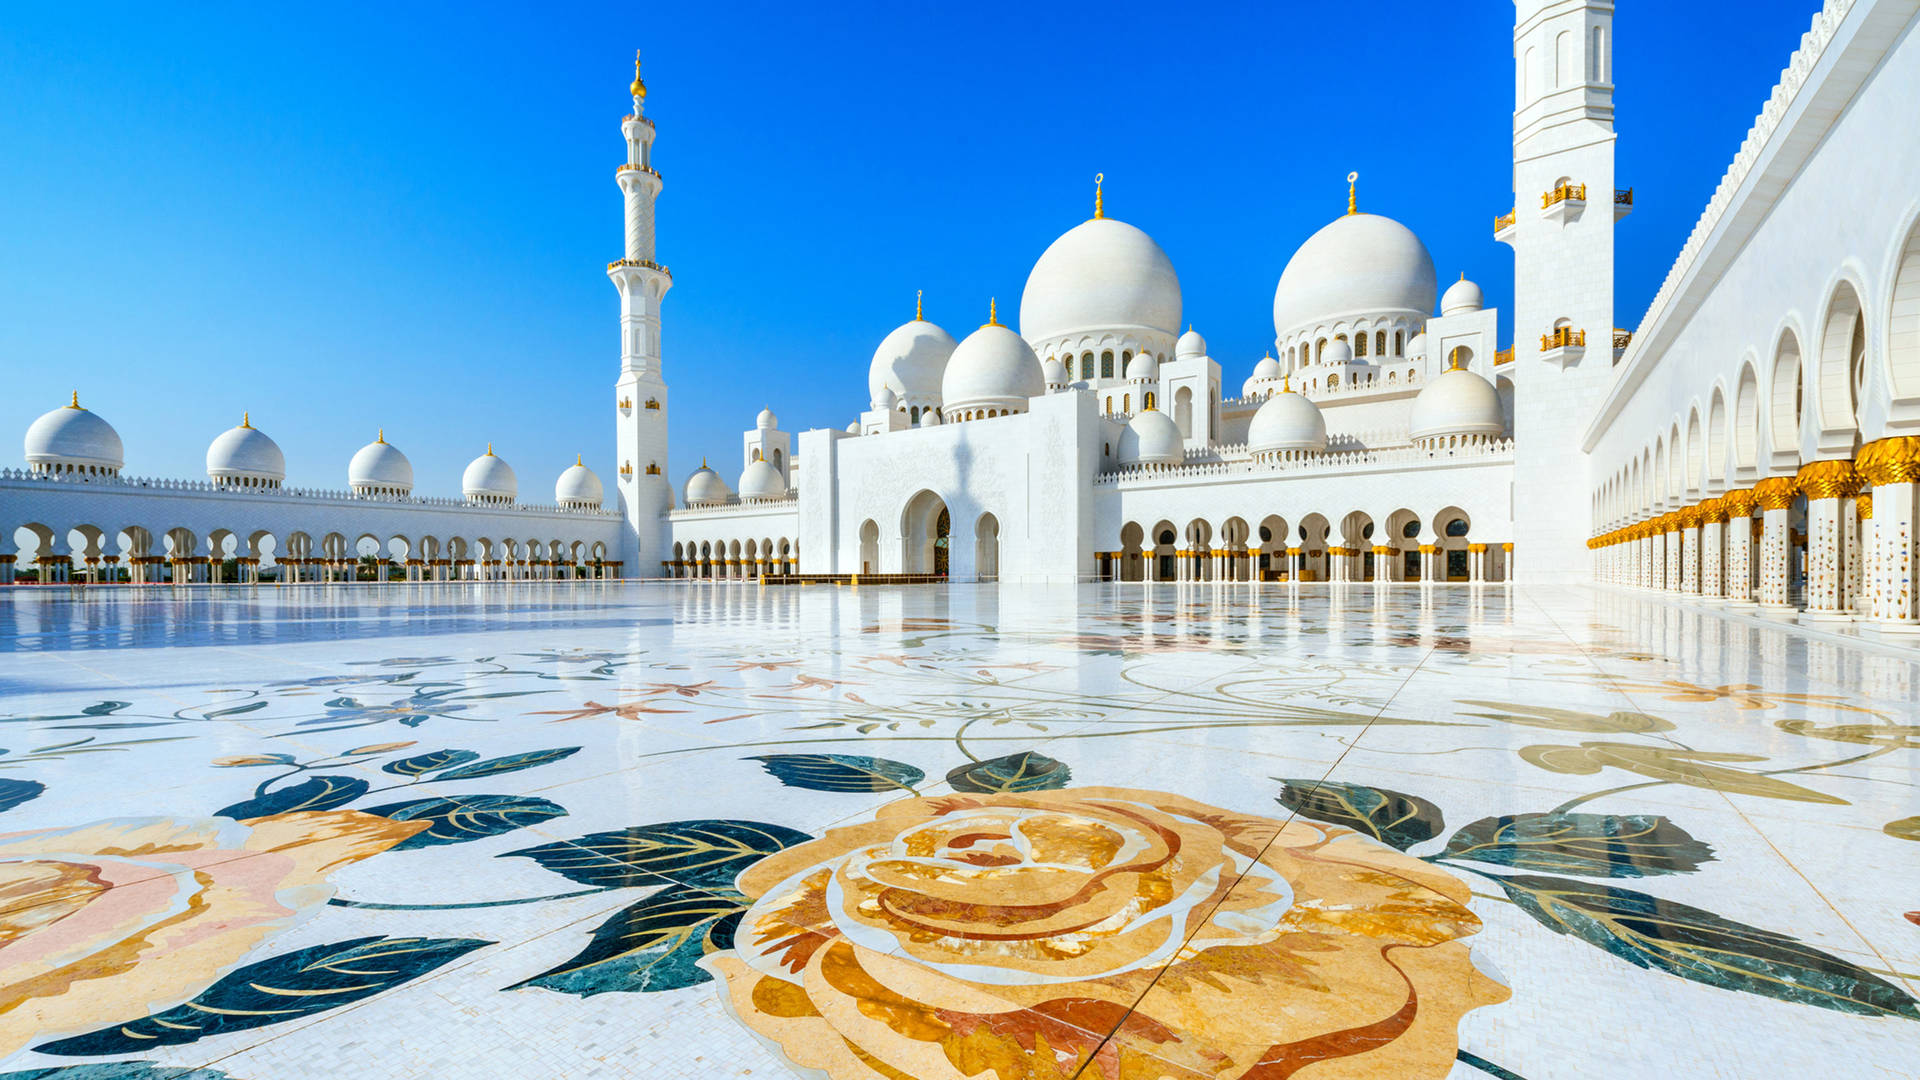 View of the Grand Mosque in Abu Dhabi